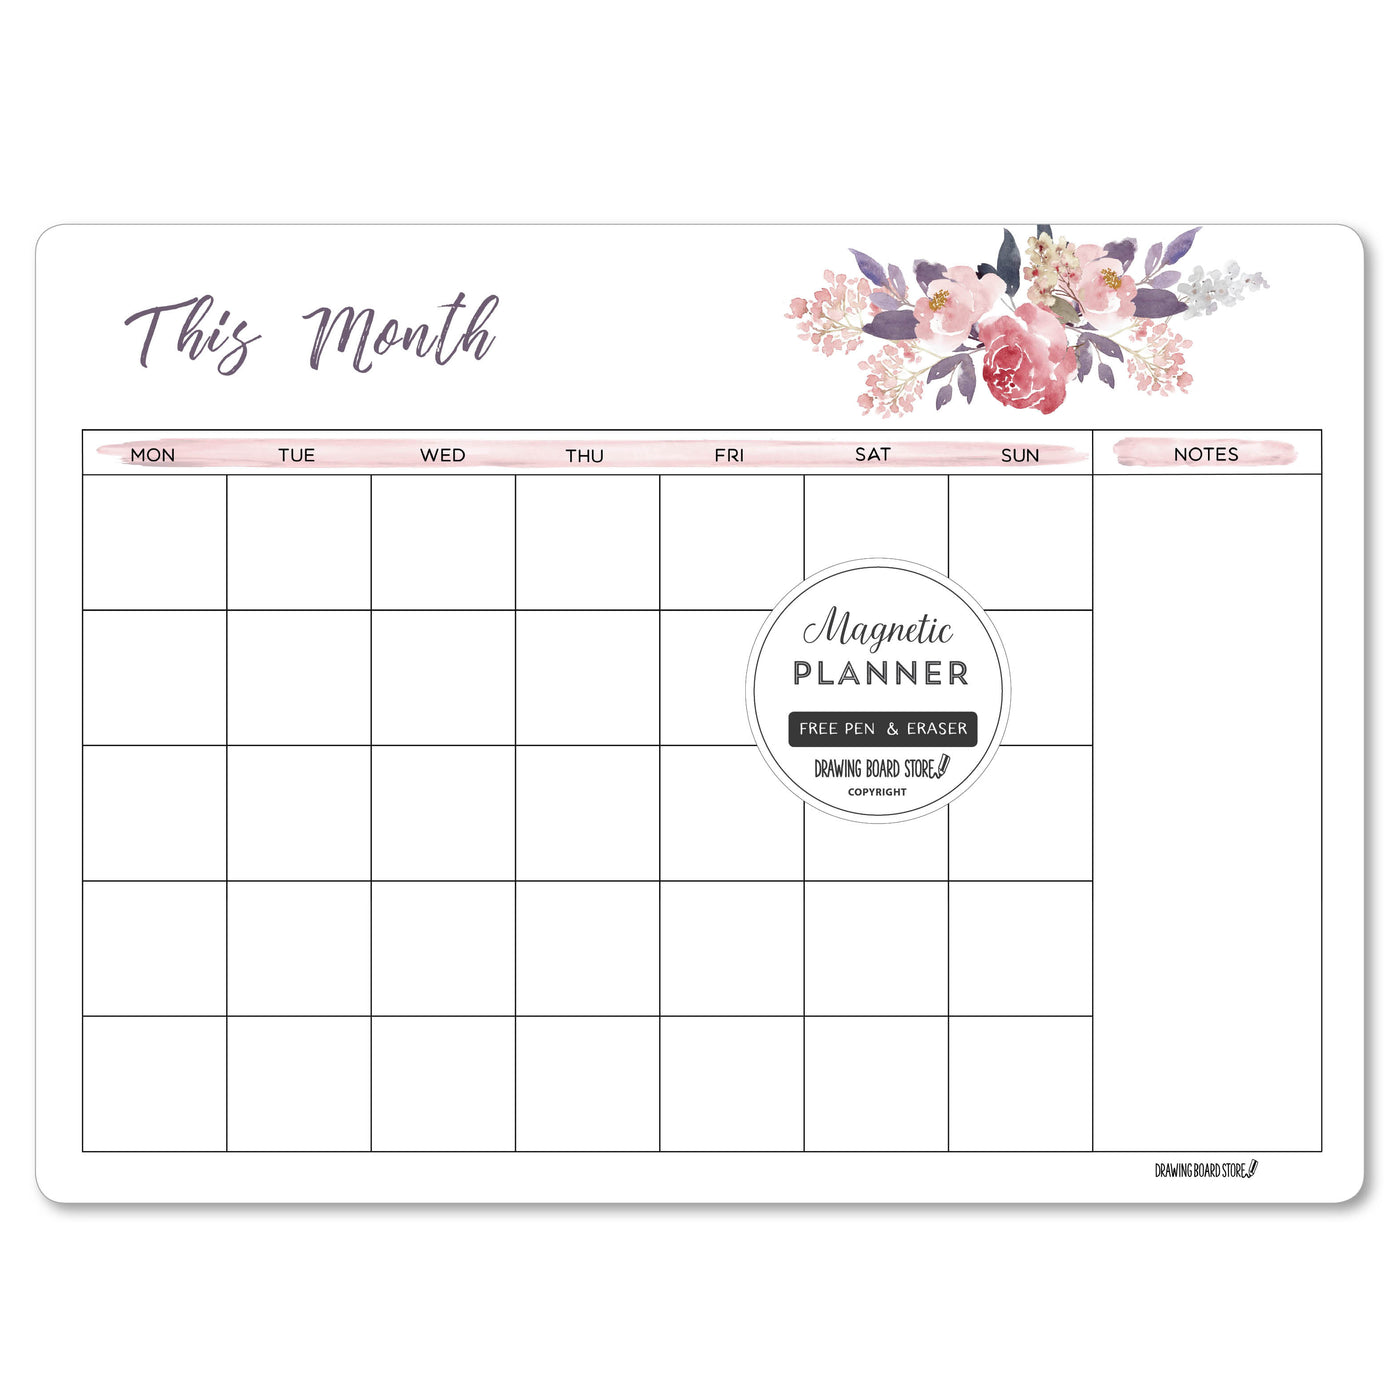 MONTHLY PLANNER  Peonies